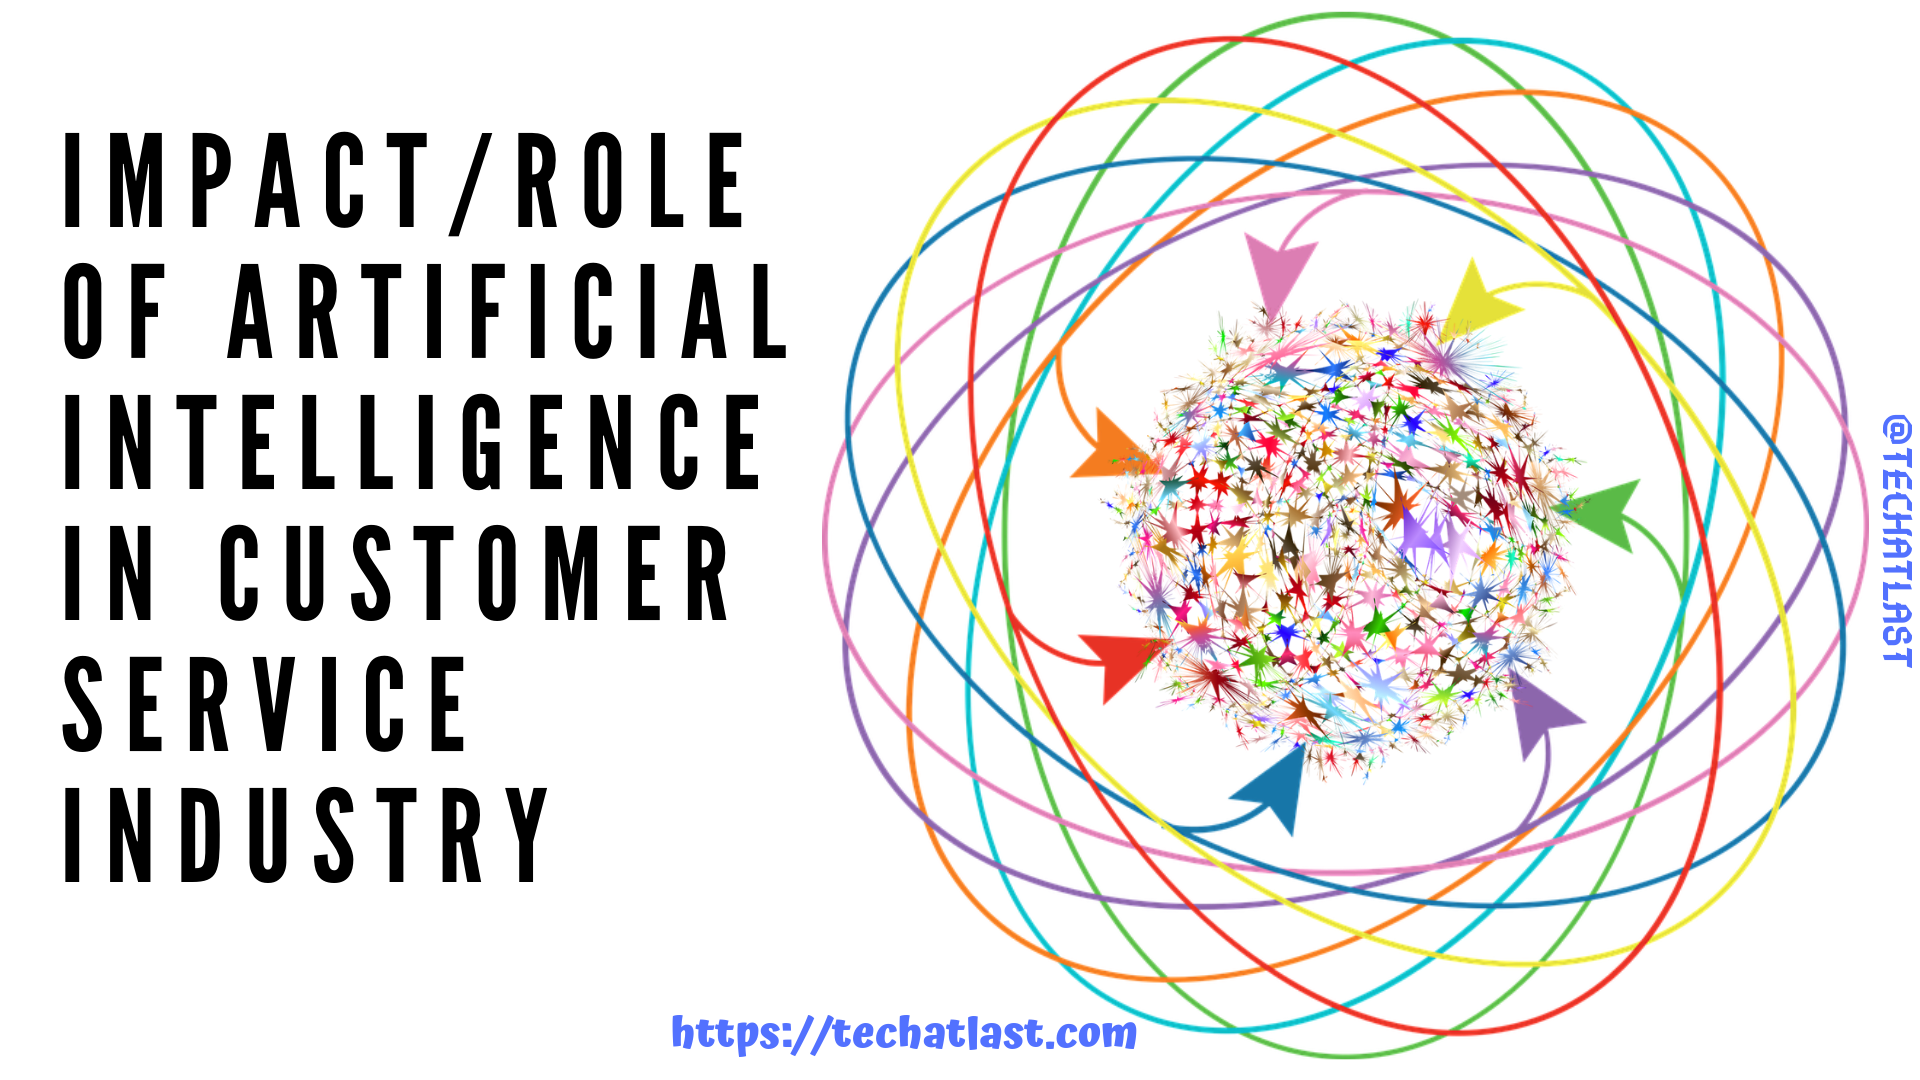 IMPACT AND ROLE OF ARTIFICIAL INTELLIGENCE IN CUSTOMER